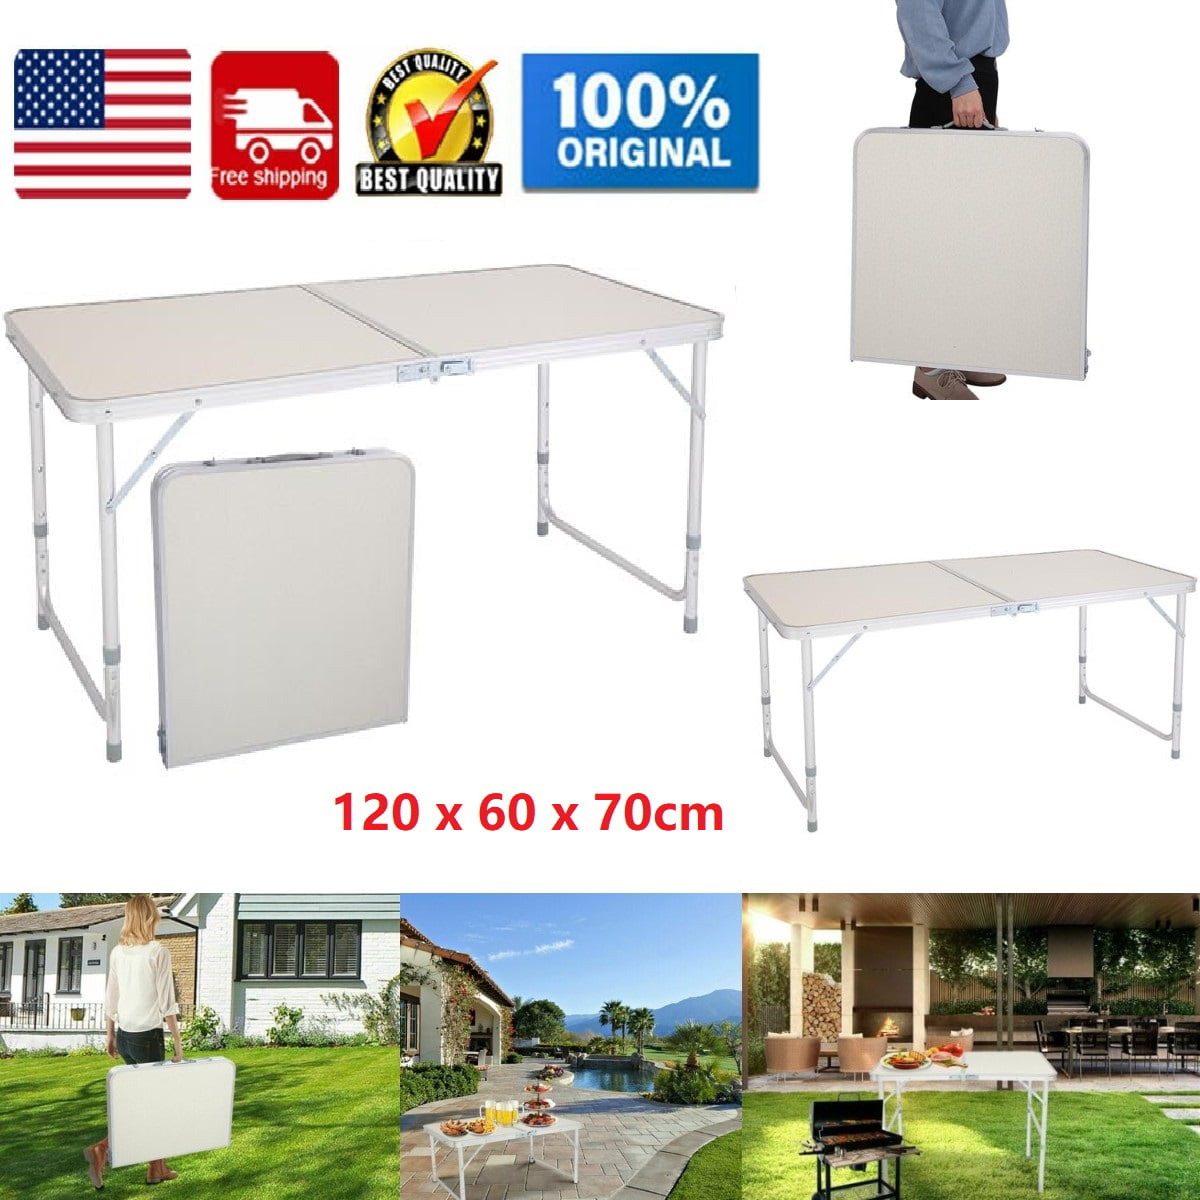 Folding Table 180x60 x70cm Space-Saving Collapsible Table White Picnic BBQ Table 